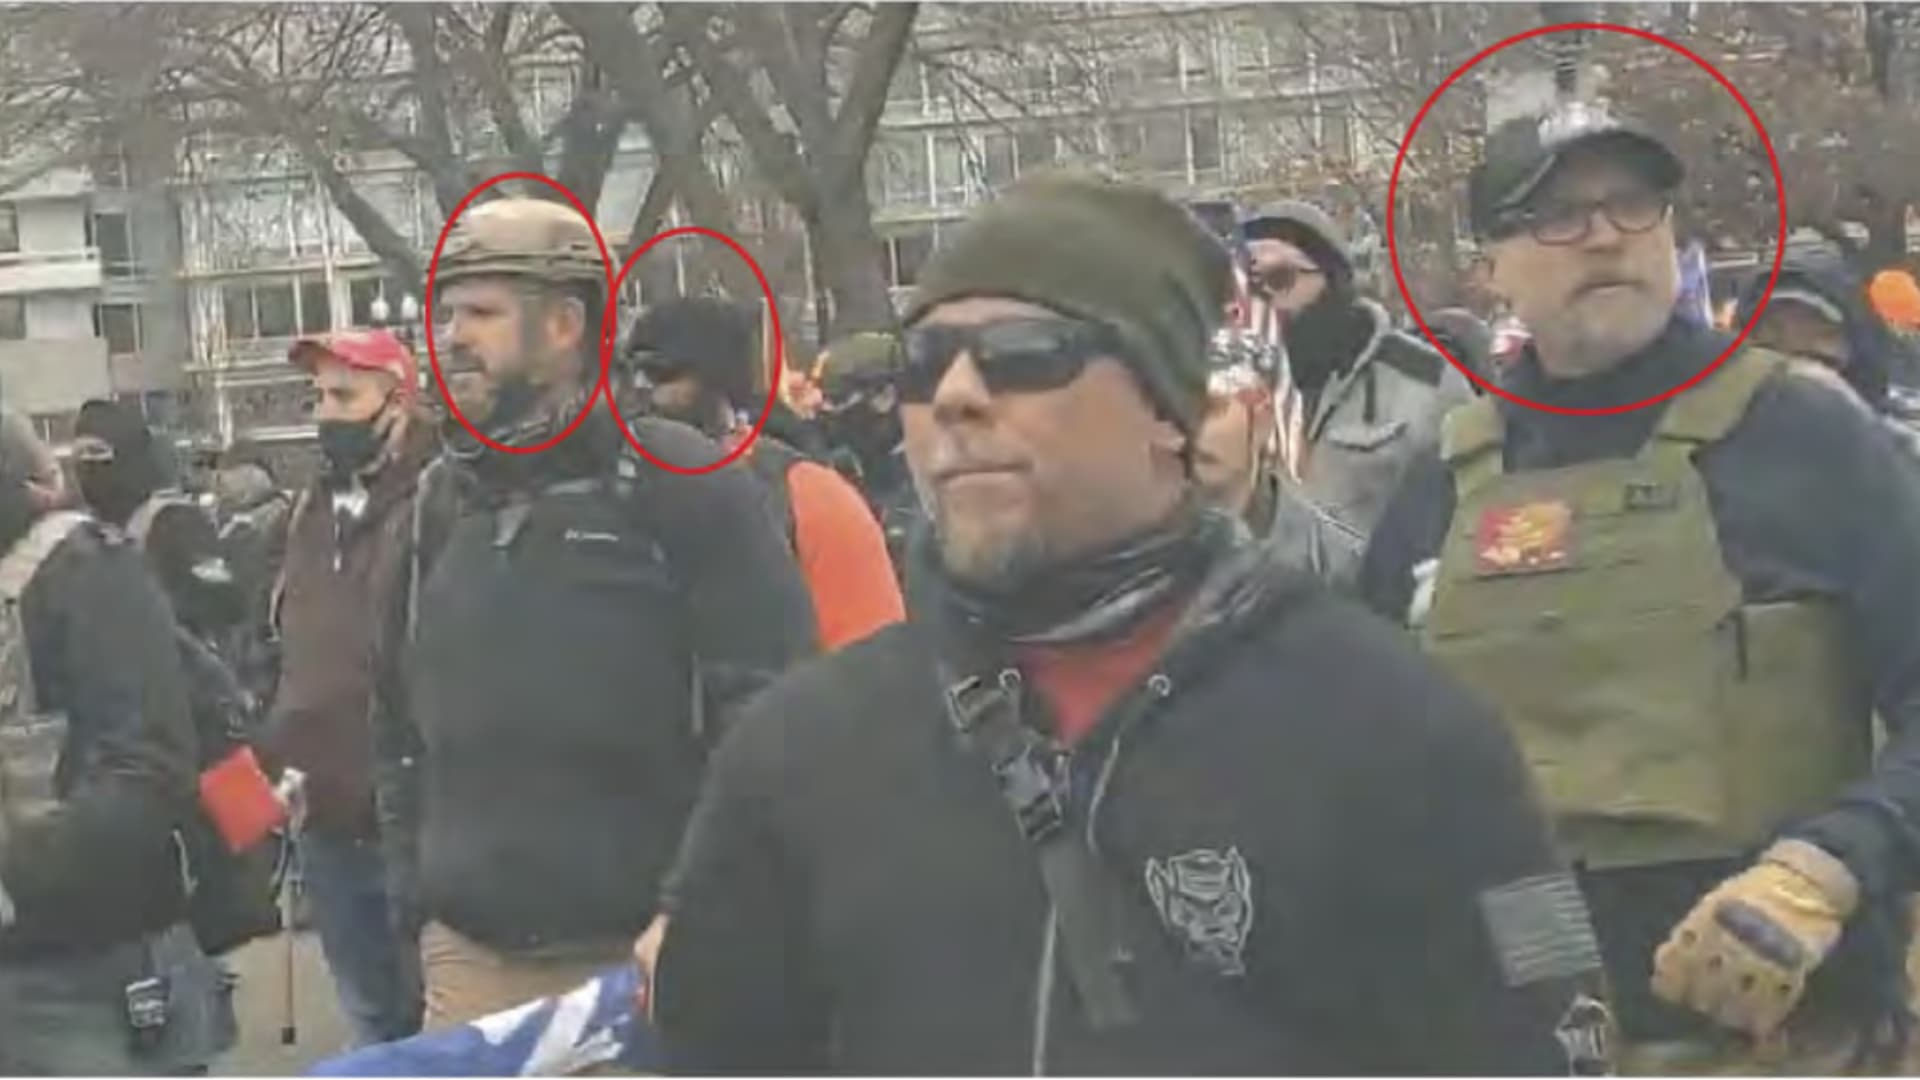 Photo included in a U.S. District Court Criminal Complaint naming participants in the U.S. Capitol Riot on Jan. 6, 2021. Circled in red participants are identified as Christopher Kuehne (L), Louis Enrique Colon (C), and William Chrestman (R)